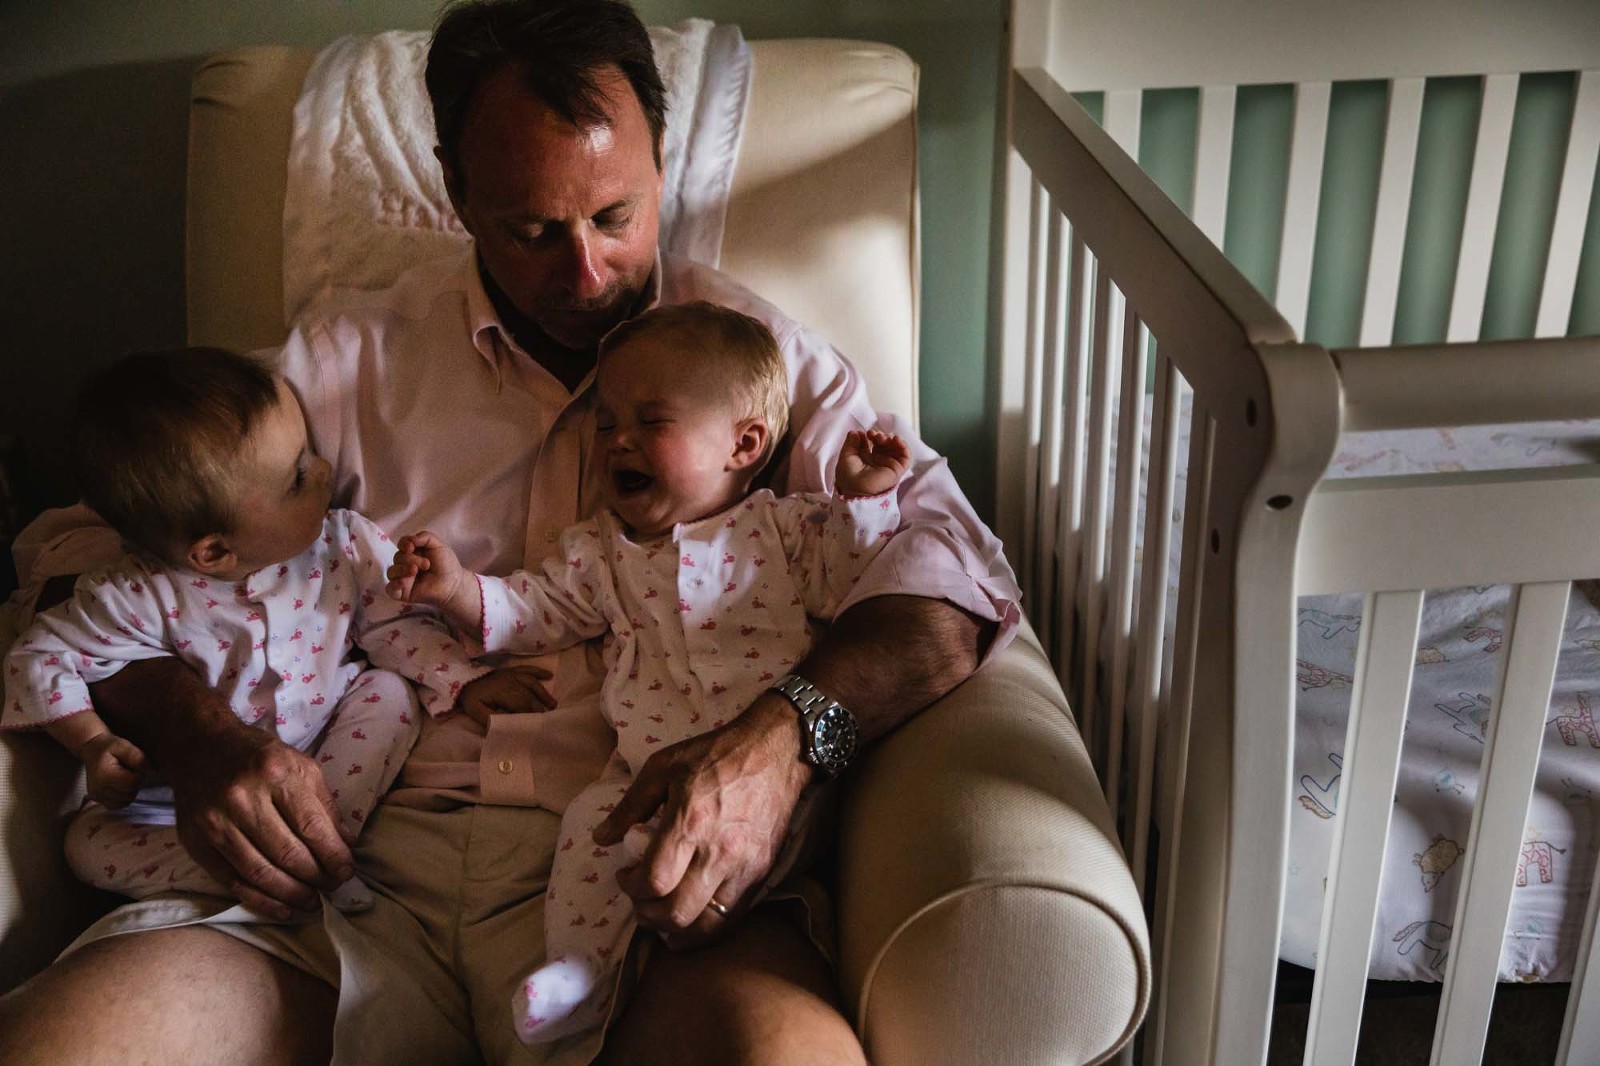 dad holds his twin daughters on his lap. one little girl cries and the other looks on confused.